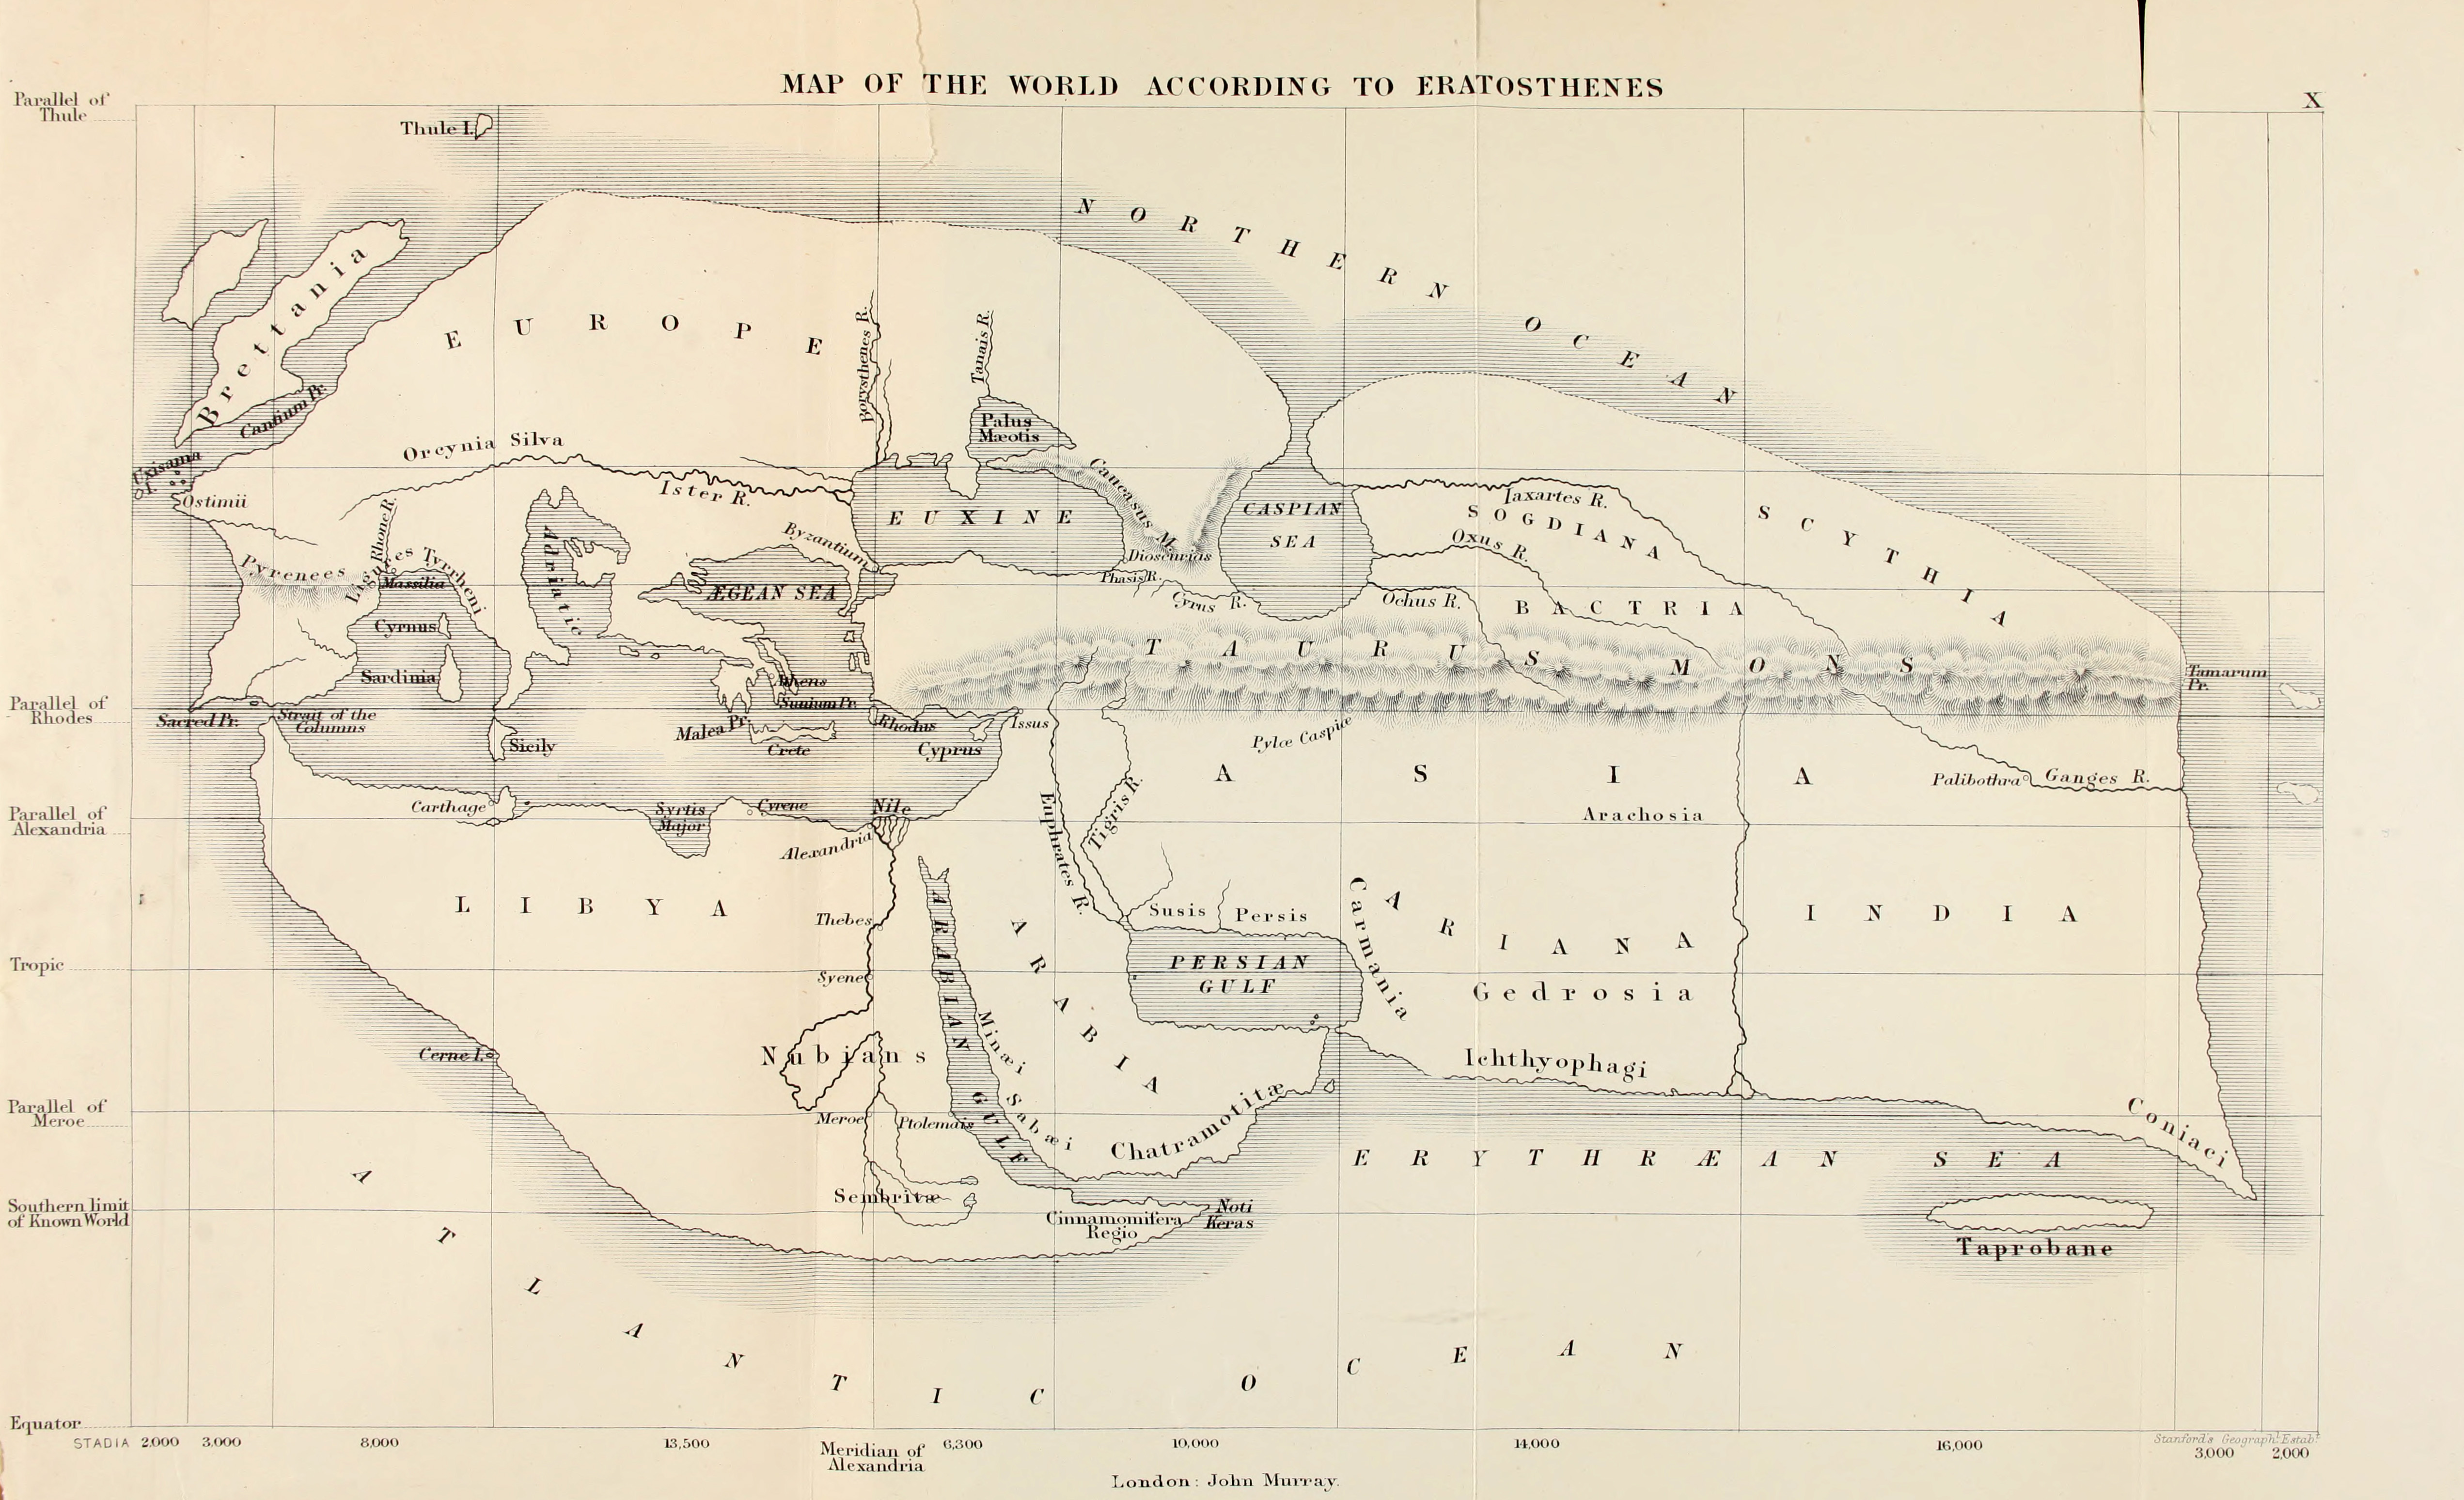 19th century reconstruction of Eratosthenes' map of the known world